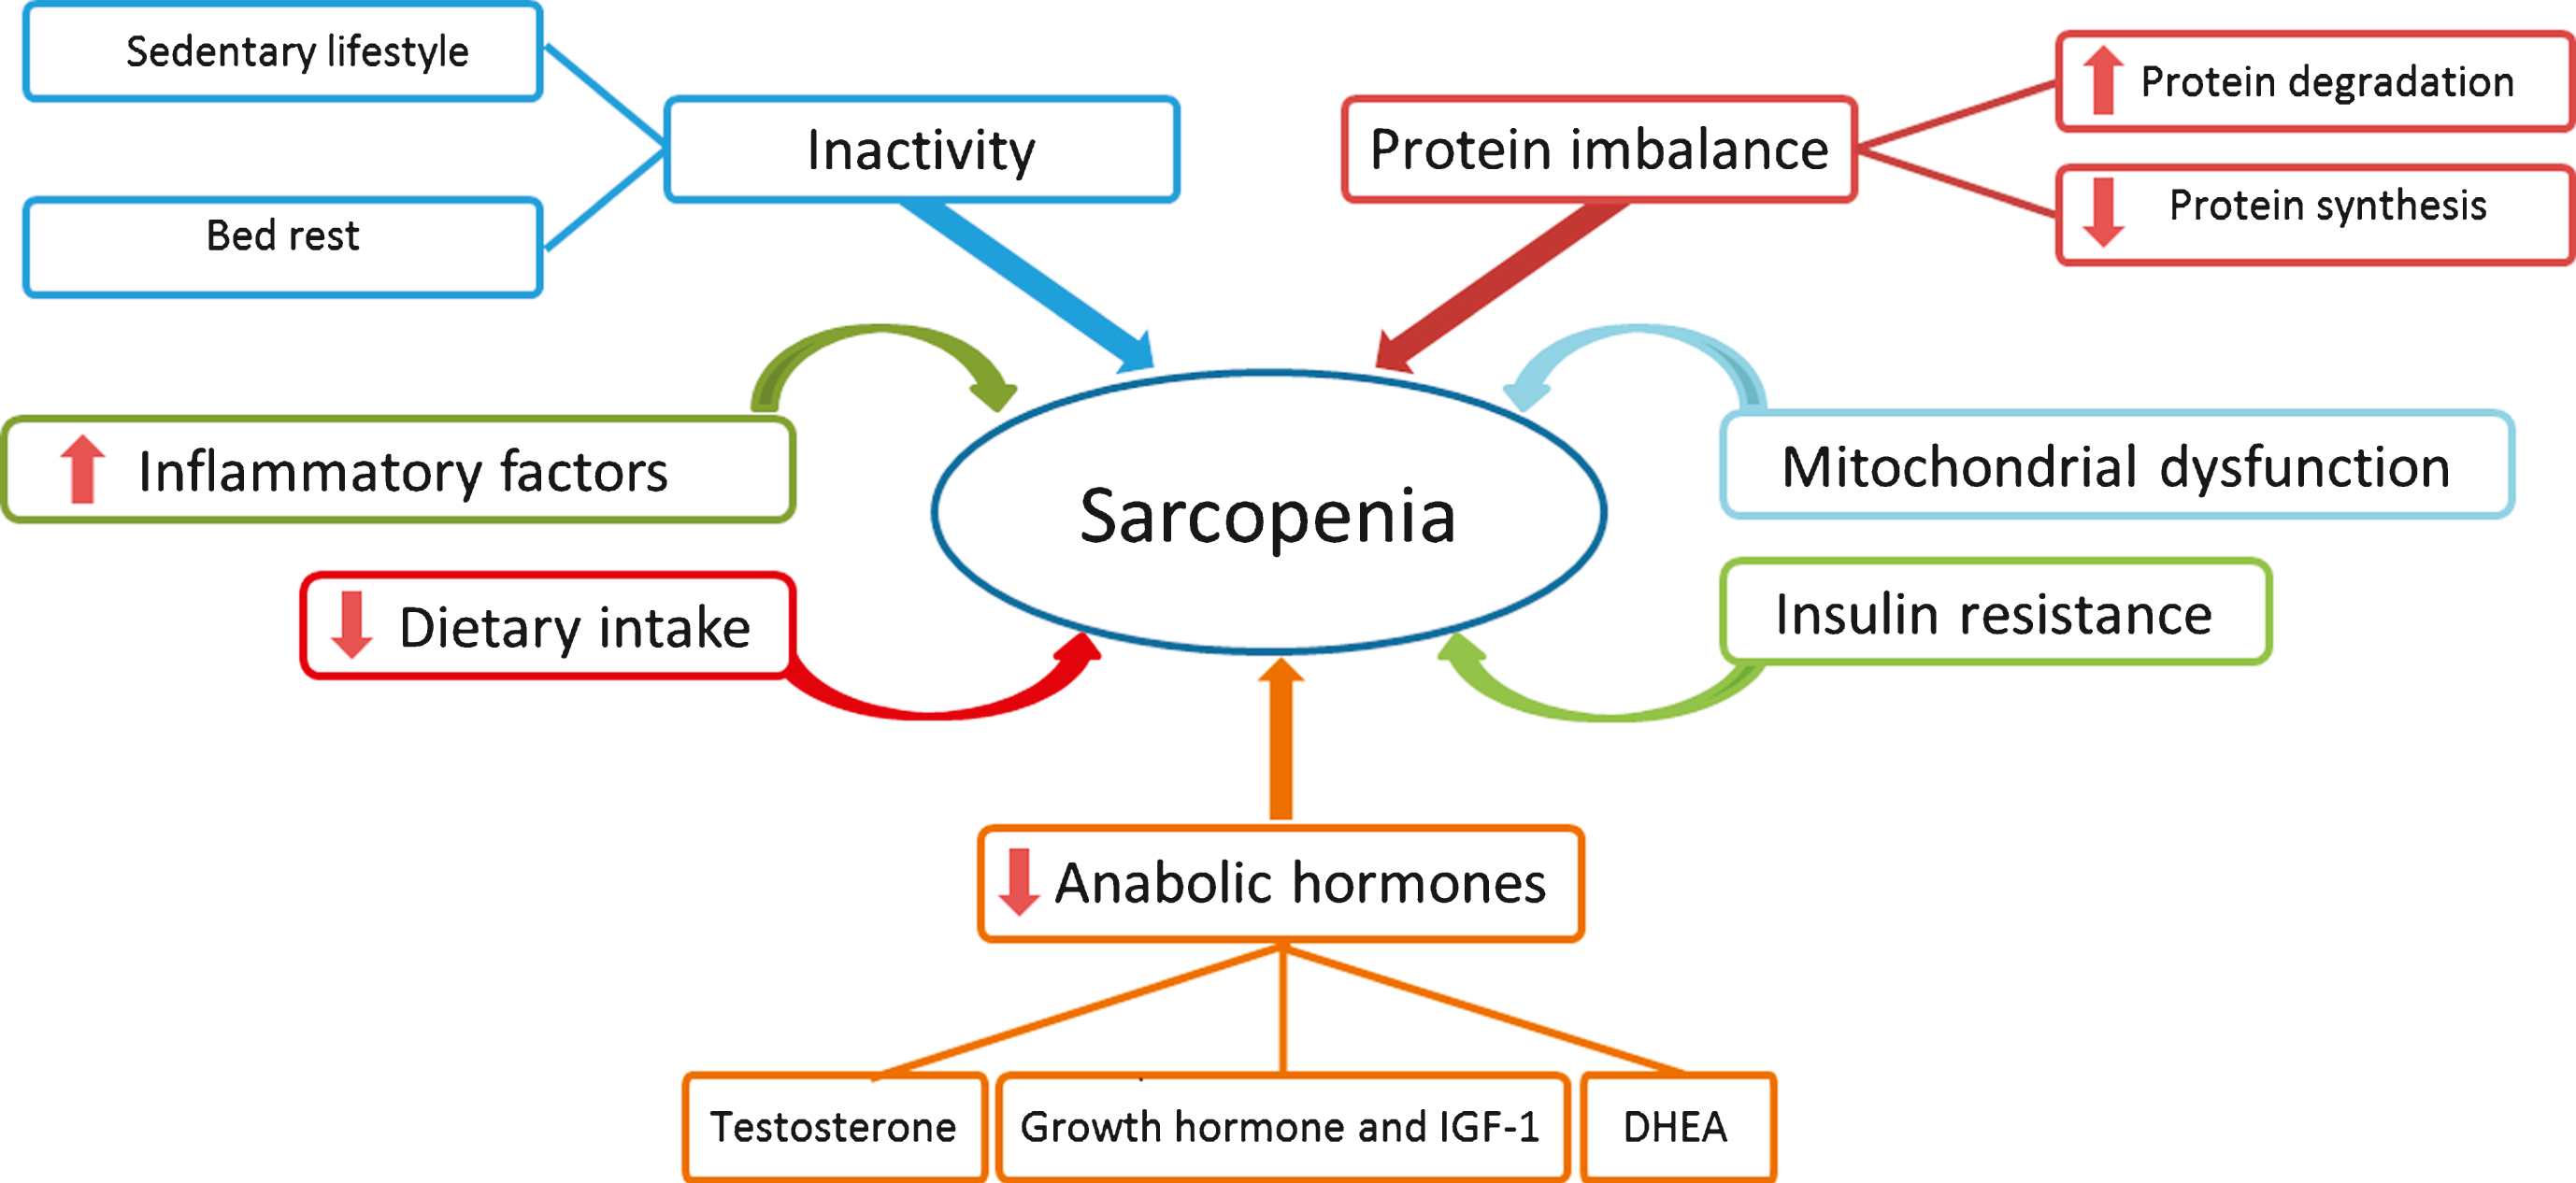 Possible Etiological Factors Associated with Sarcopenia. Sedentary life style and bed rest in older adults are the major causes of inactivity, which leads to loss of the skeletal muscle mass and atrophy. Inadequate food intake and malnutrition result in impaired skeletal muscle maintenance. Furthermore, mitochondrial dysfunction, insulin resistance and inflammation are regarded as common linking factors associated with sarcopenia. Decreased level of anabolic hormones, resistance to anabolic stimulus, decreased muscle protein synthesis and increased muscle protein degradation are among the most important etiologic factors resulting in sarcopenia in older adults. DHEA indicates dehydroepiandrosterone; IGF-1, Insulin-like growth factor 1.